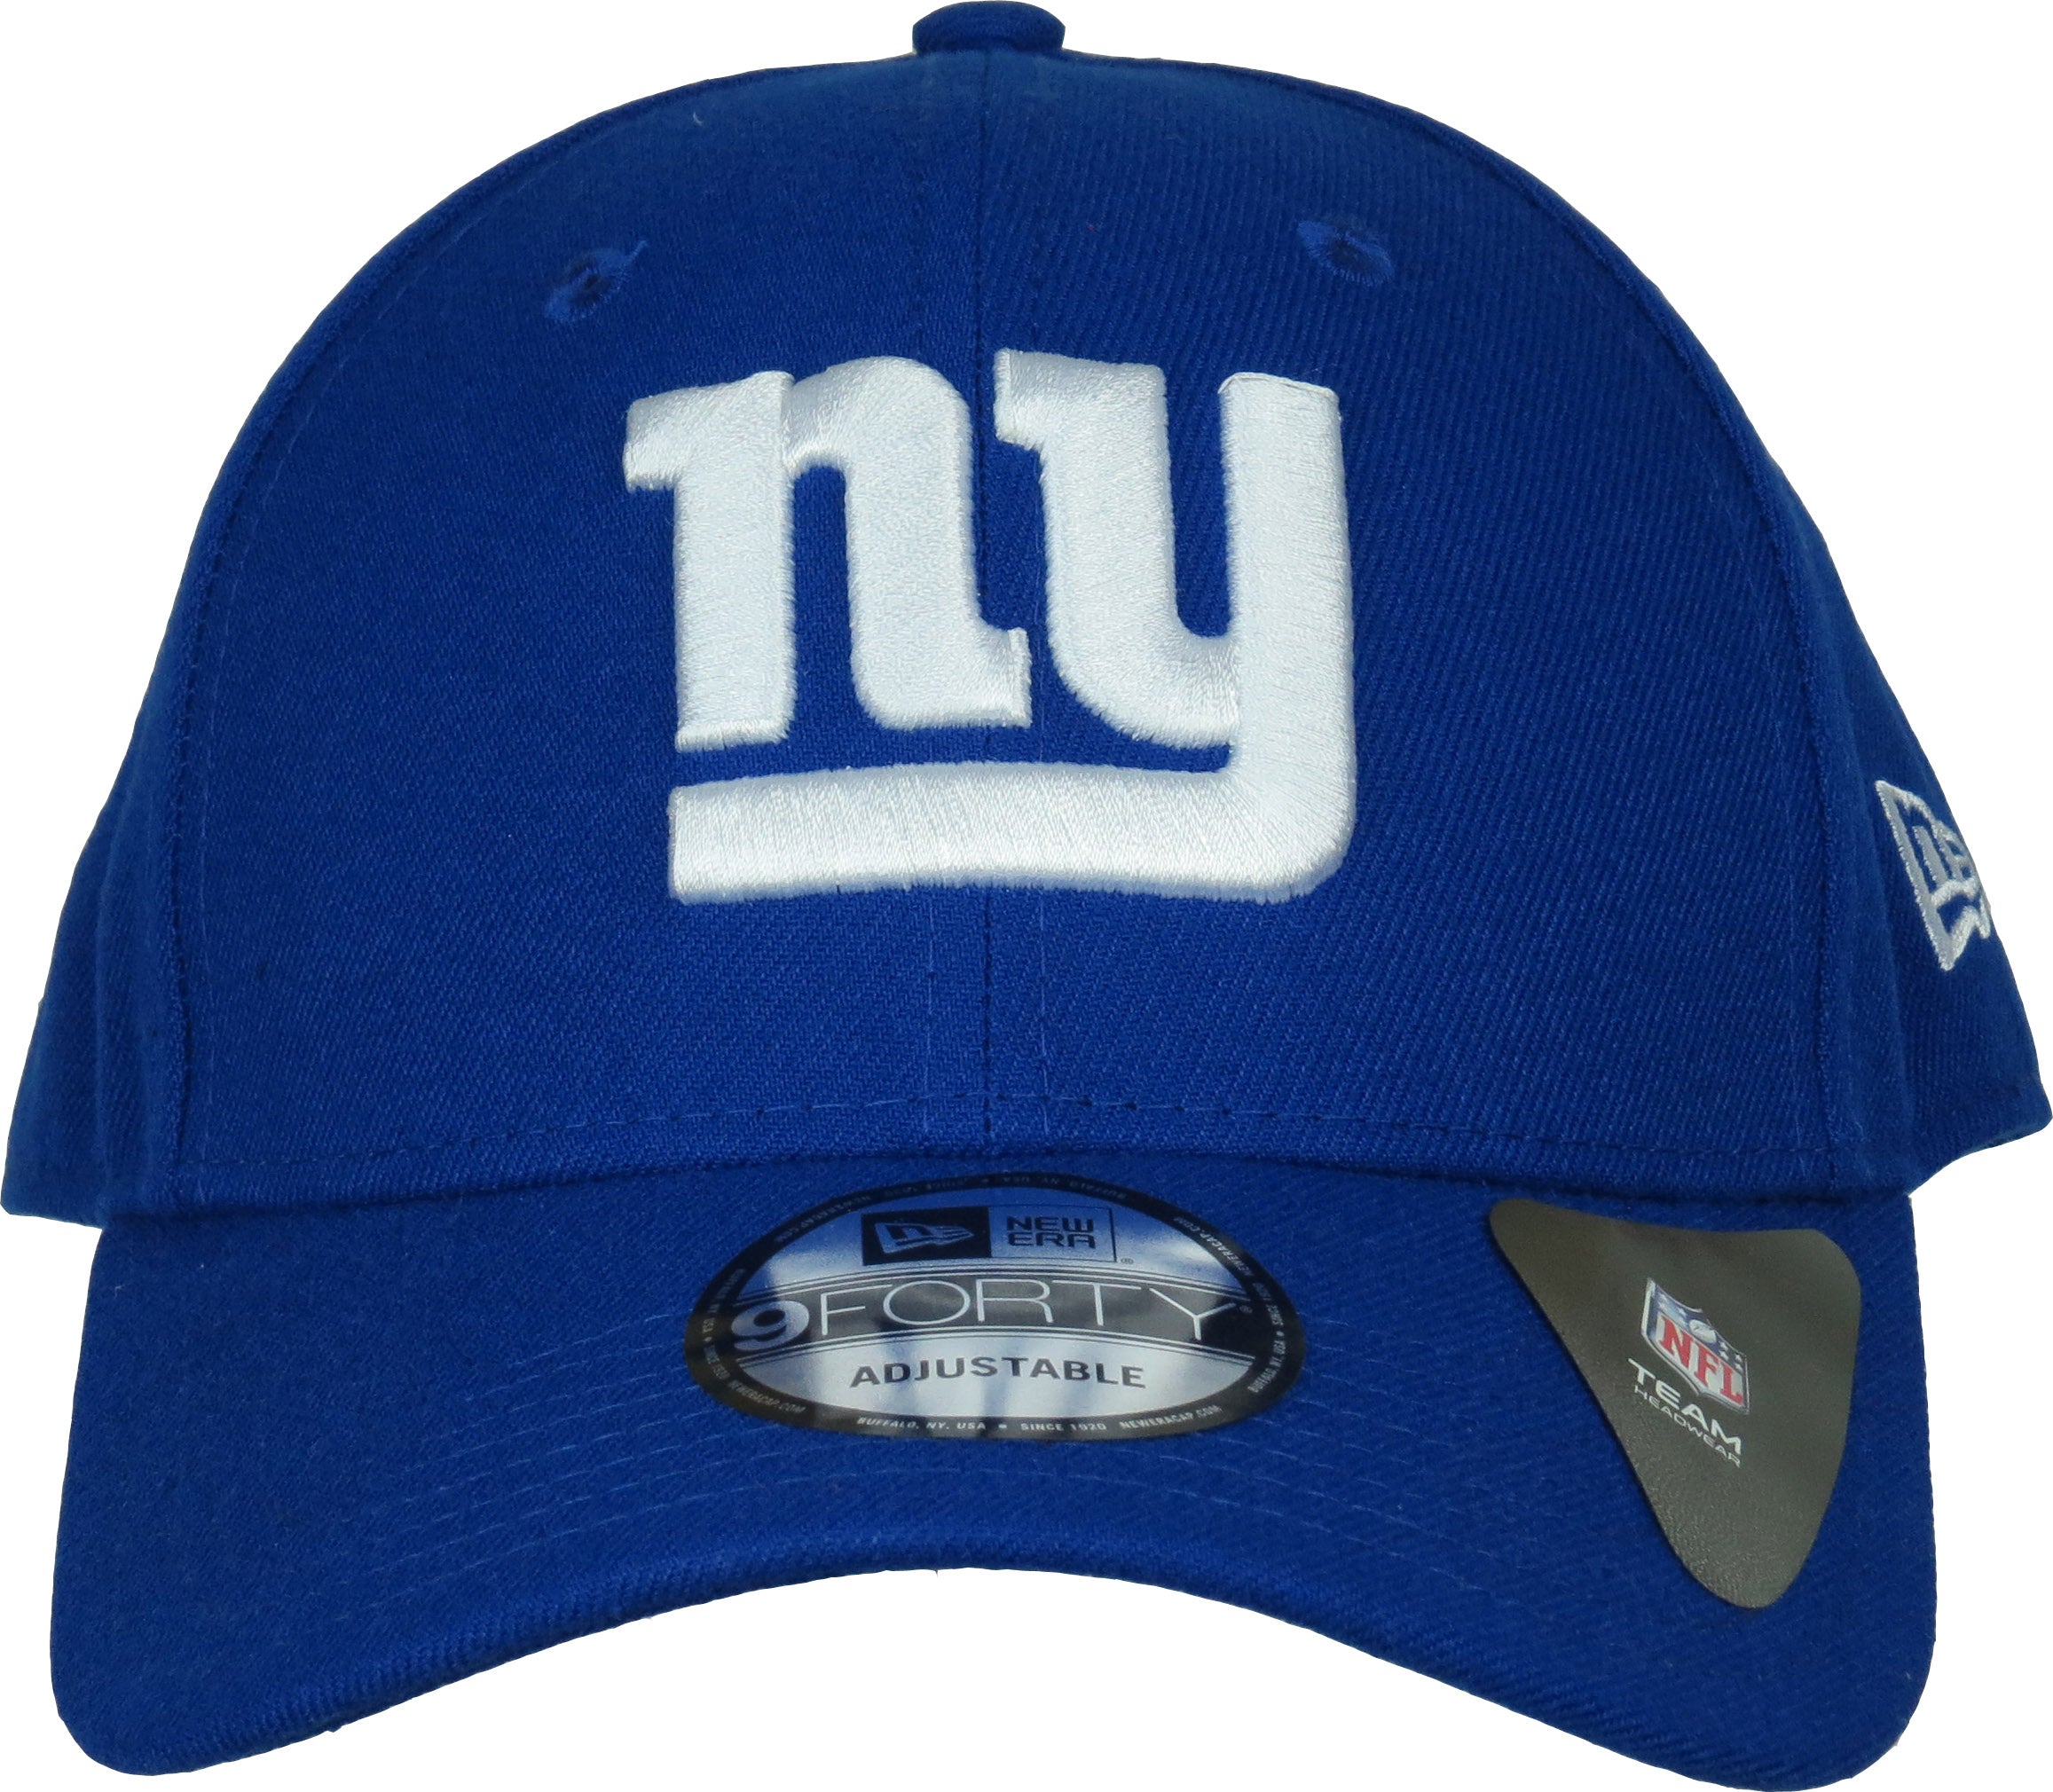 ny giants hats for sale